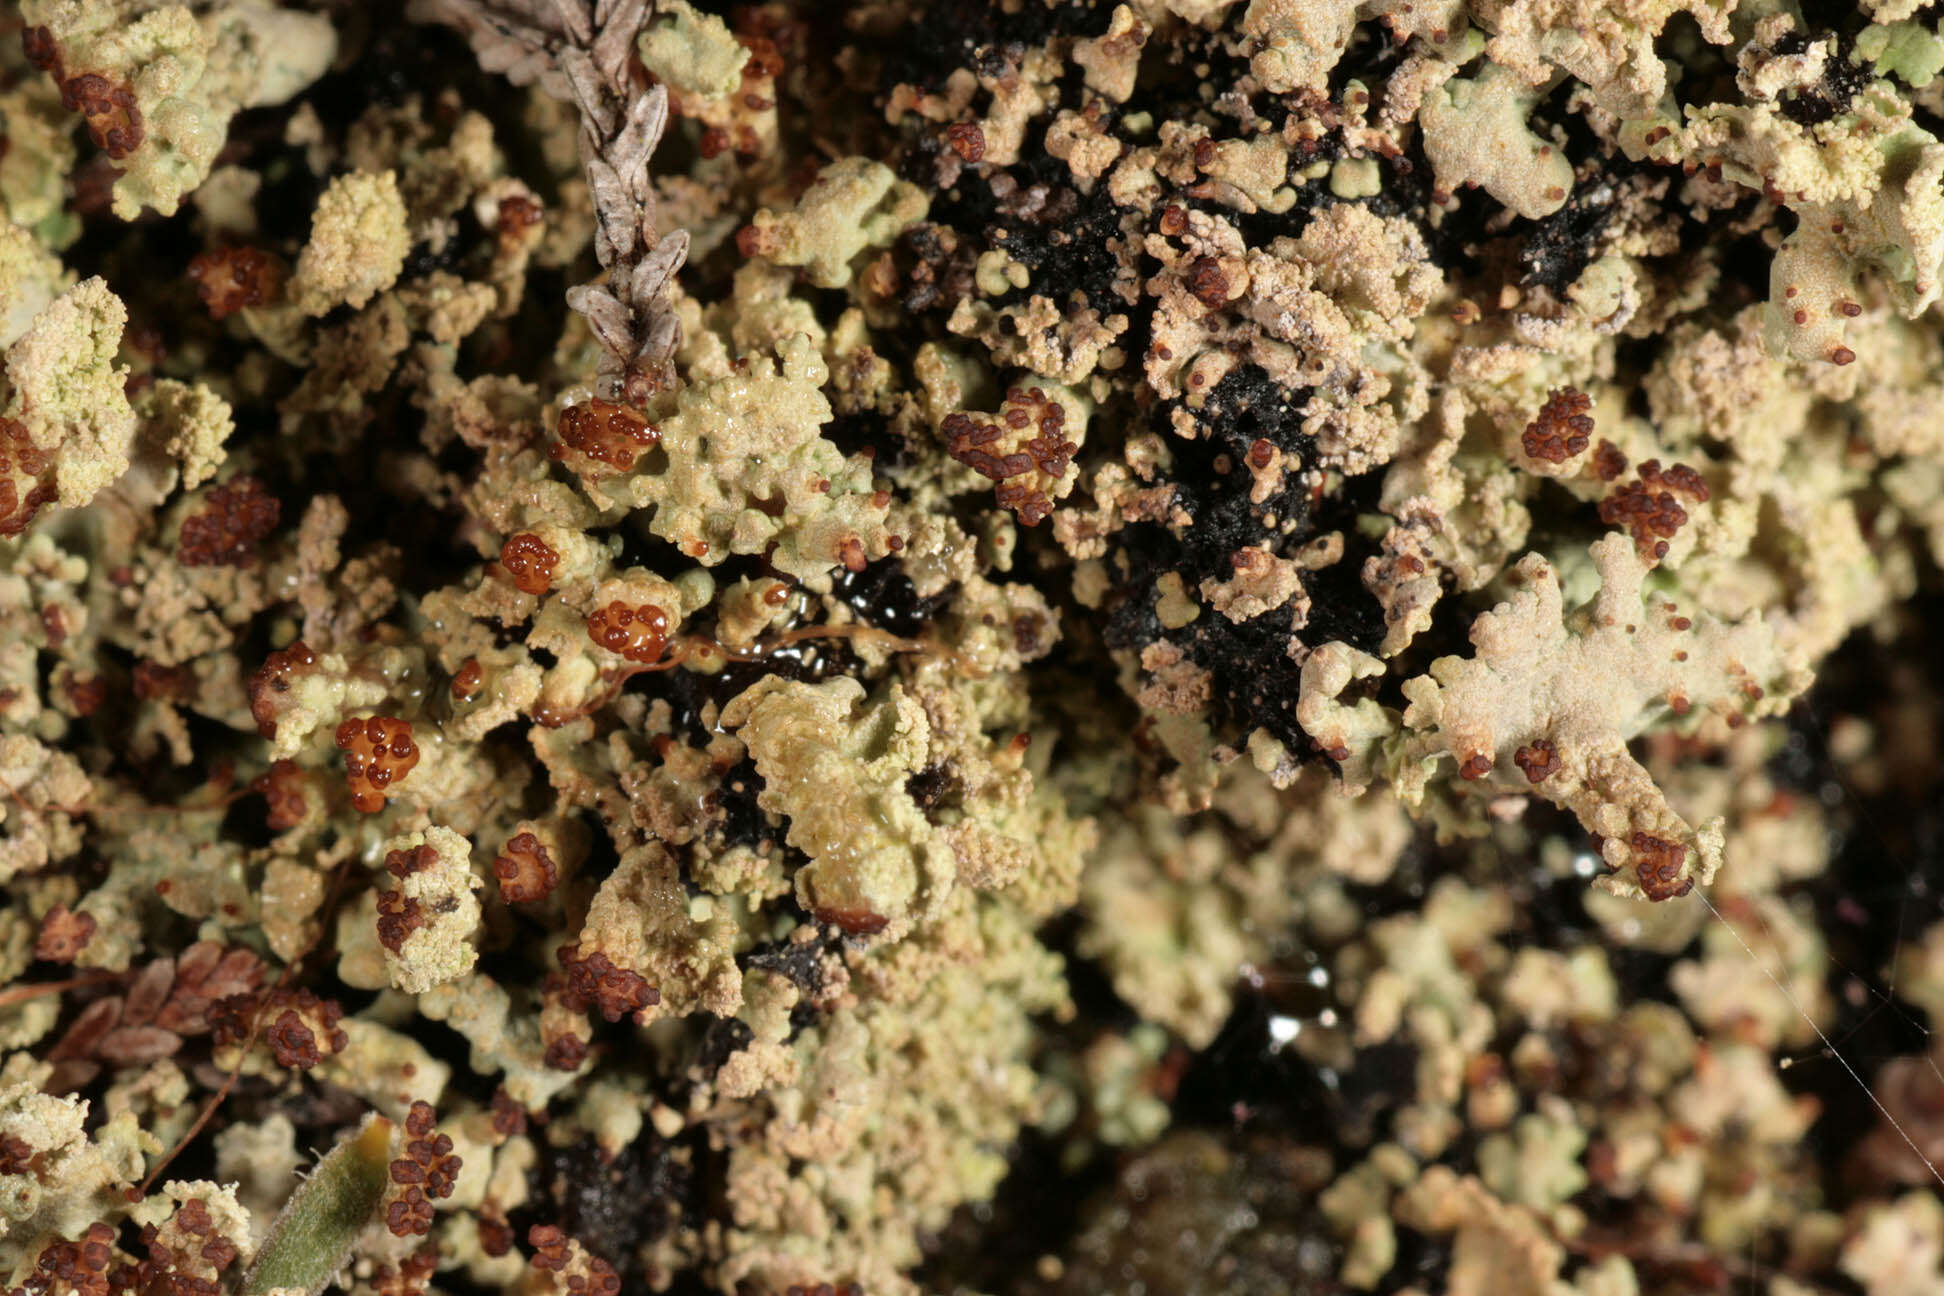 Image of cup lichen